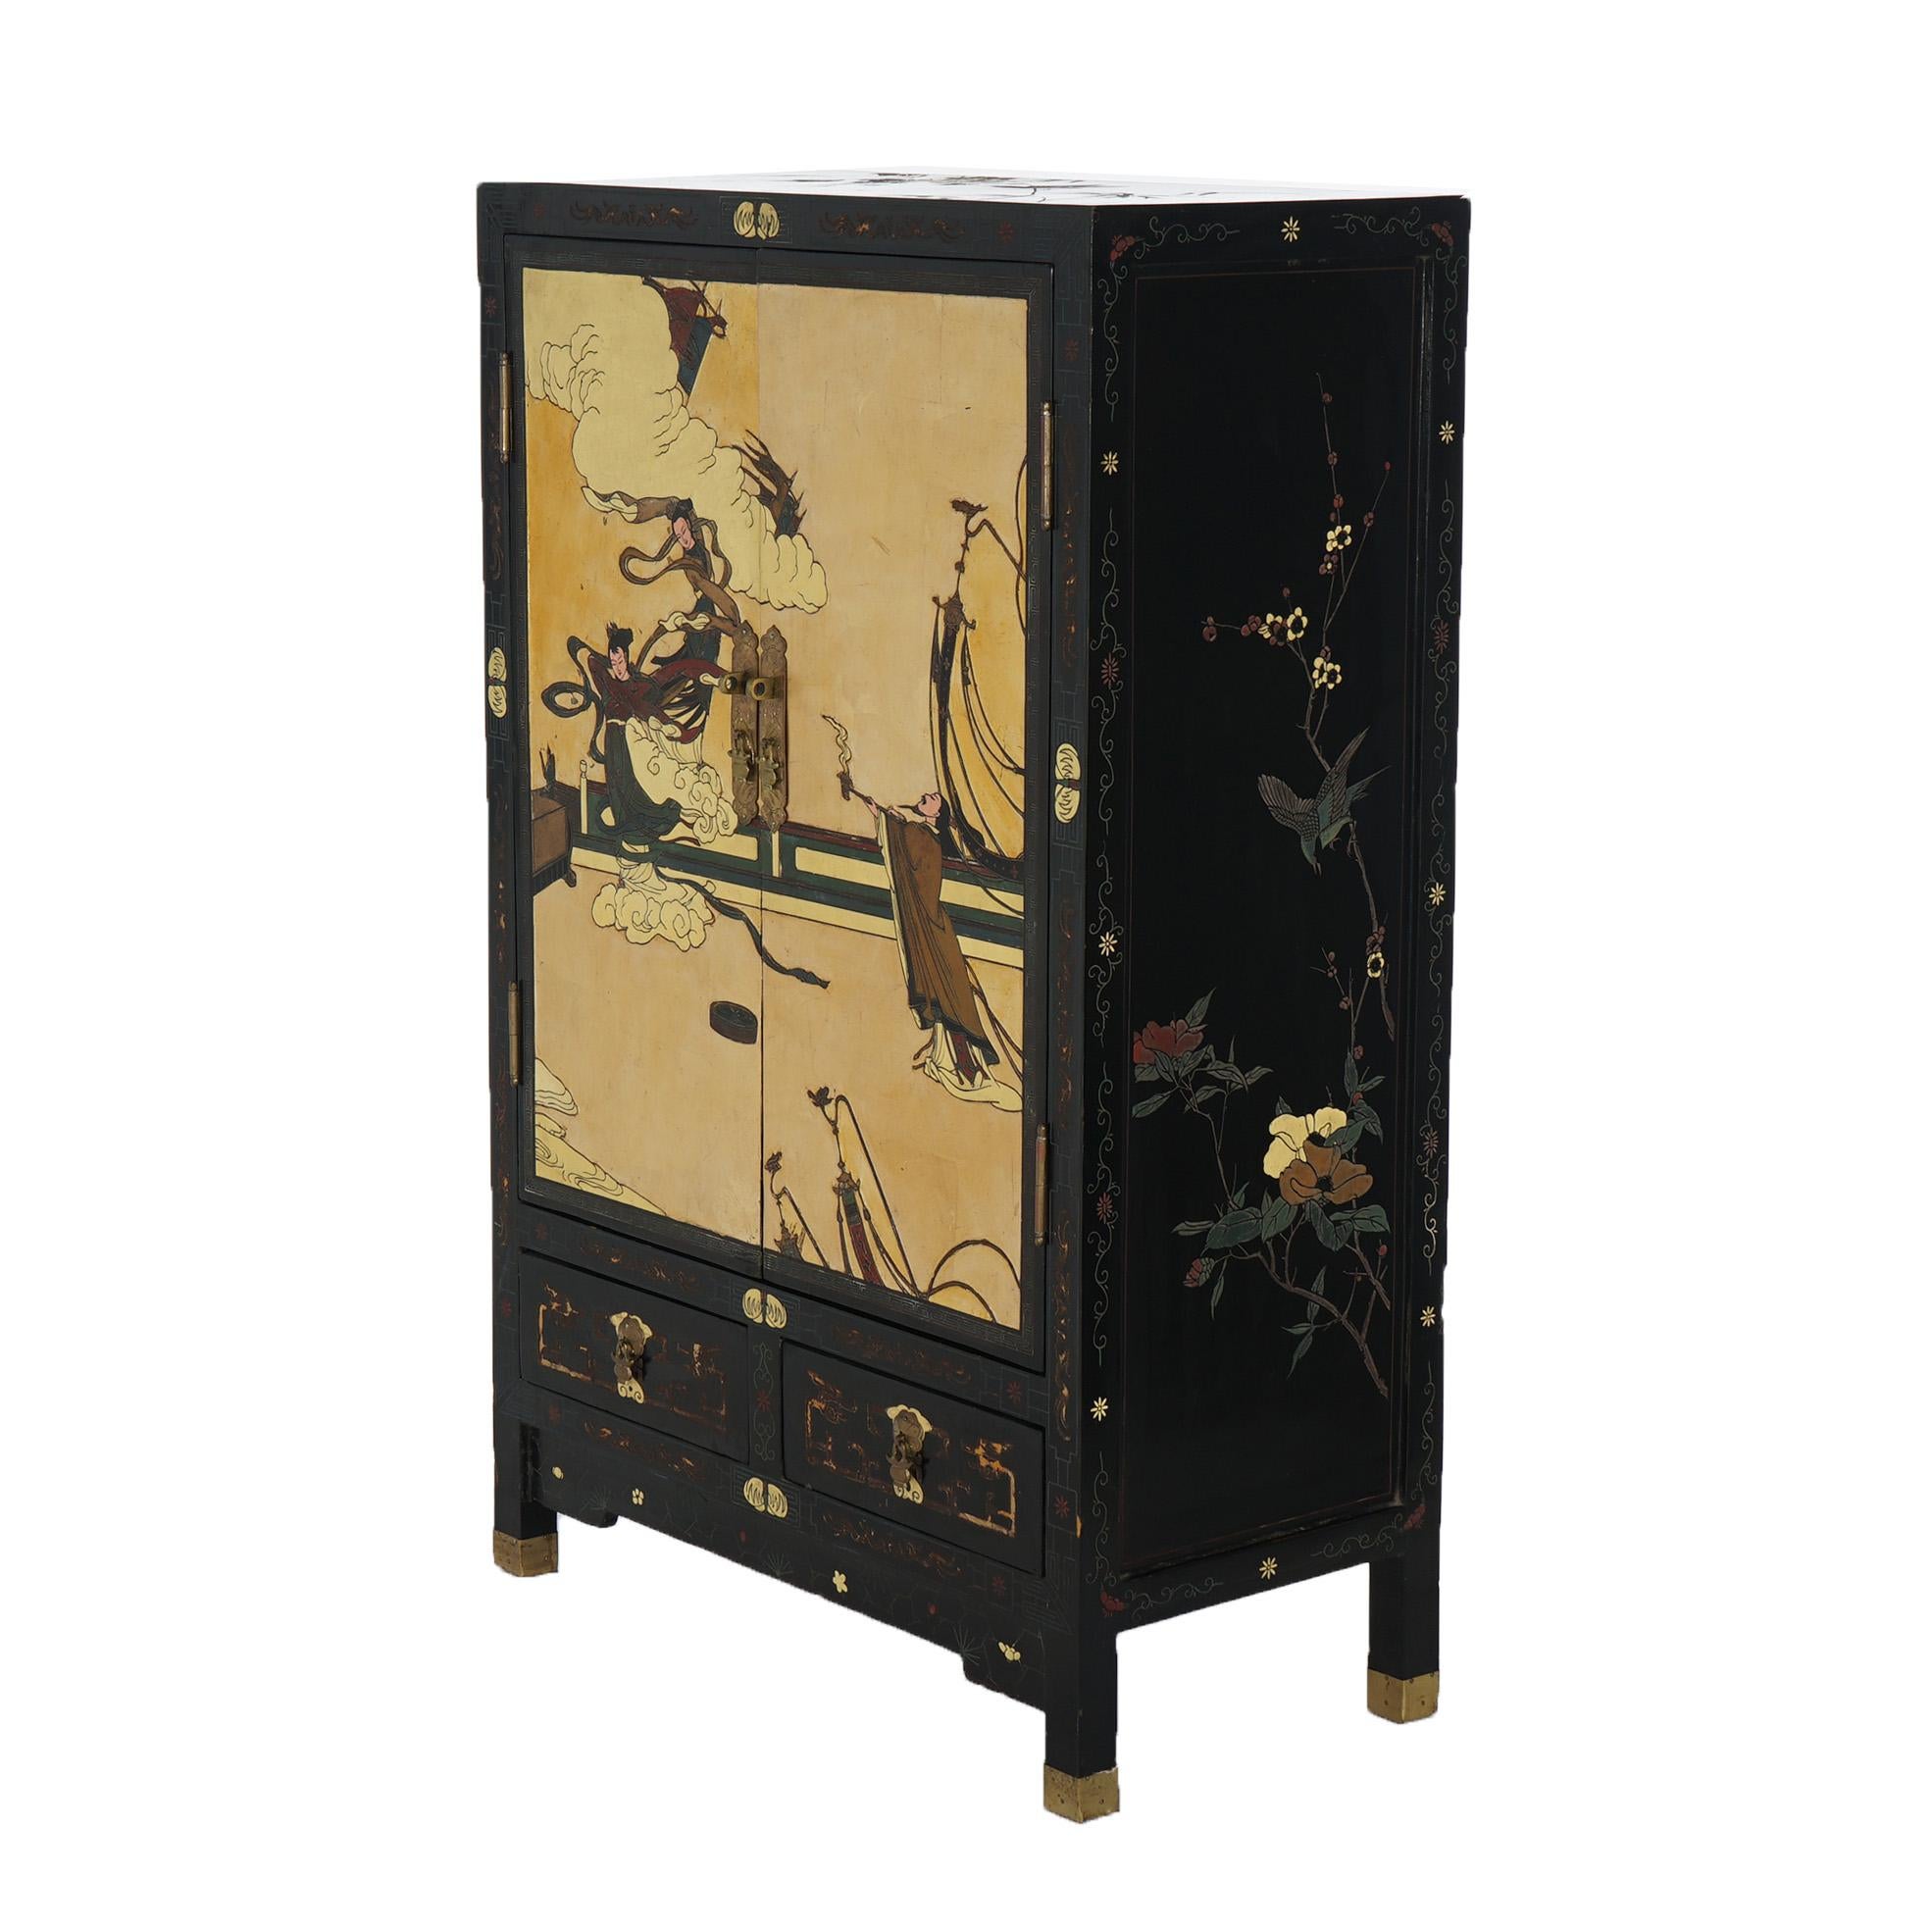 ***Ask About Reduced In-House Delivery Rates - Reliable Professional Service & Fully Insured***
Antique Japanese Ebonized & Gilt Chinoiserie Decorated Tea Cabinet with Genre Scene with Dancing Young Women and Floral Elements, Raised on Straight &